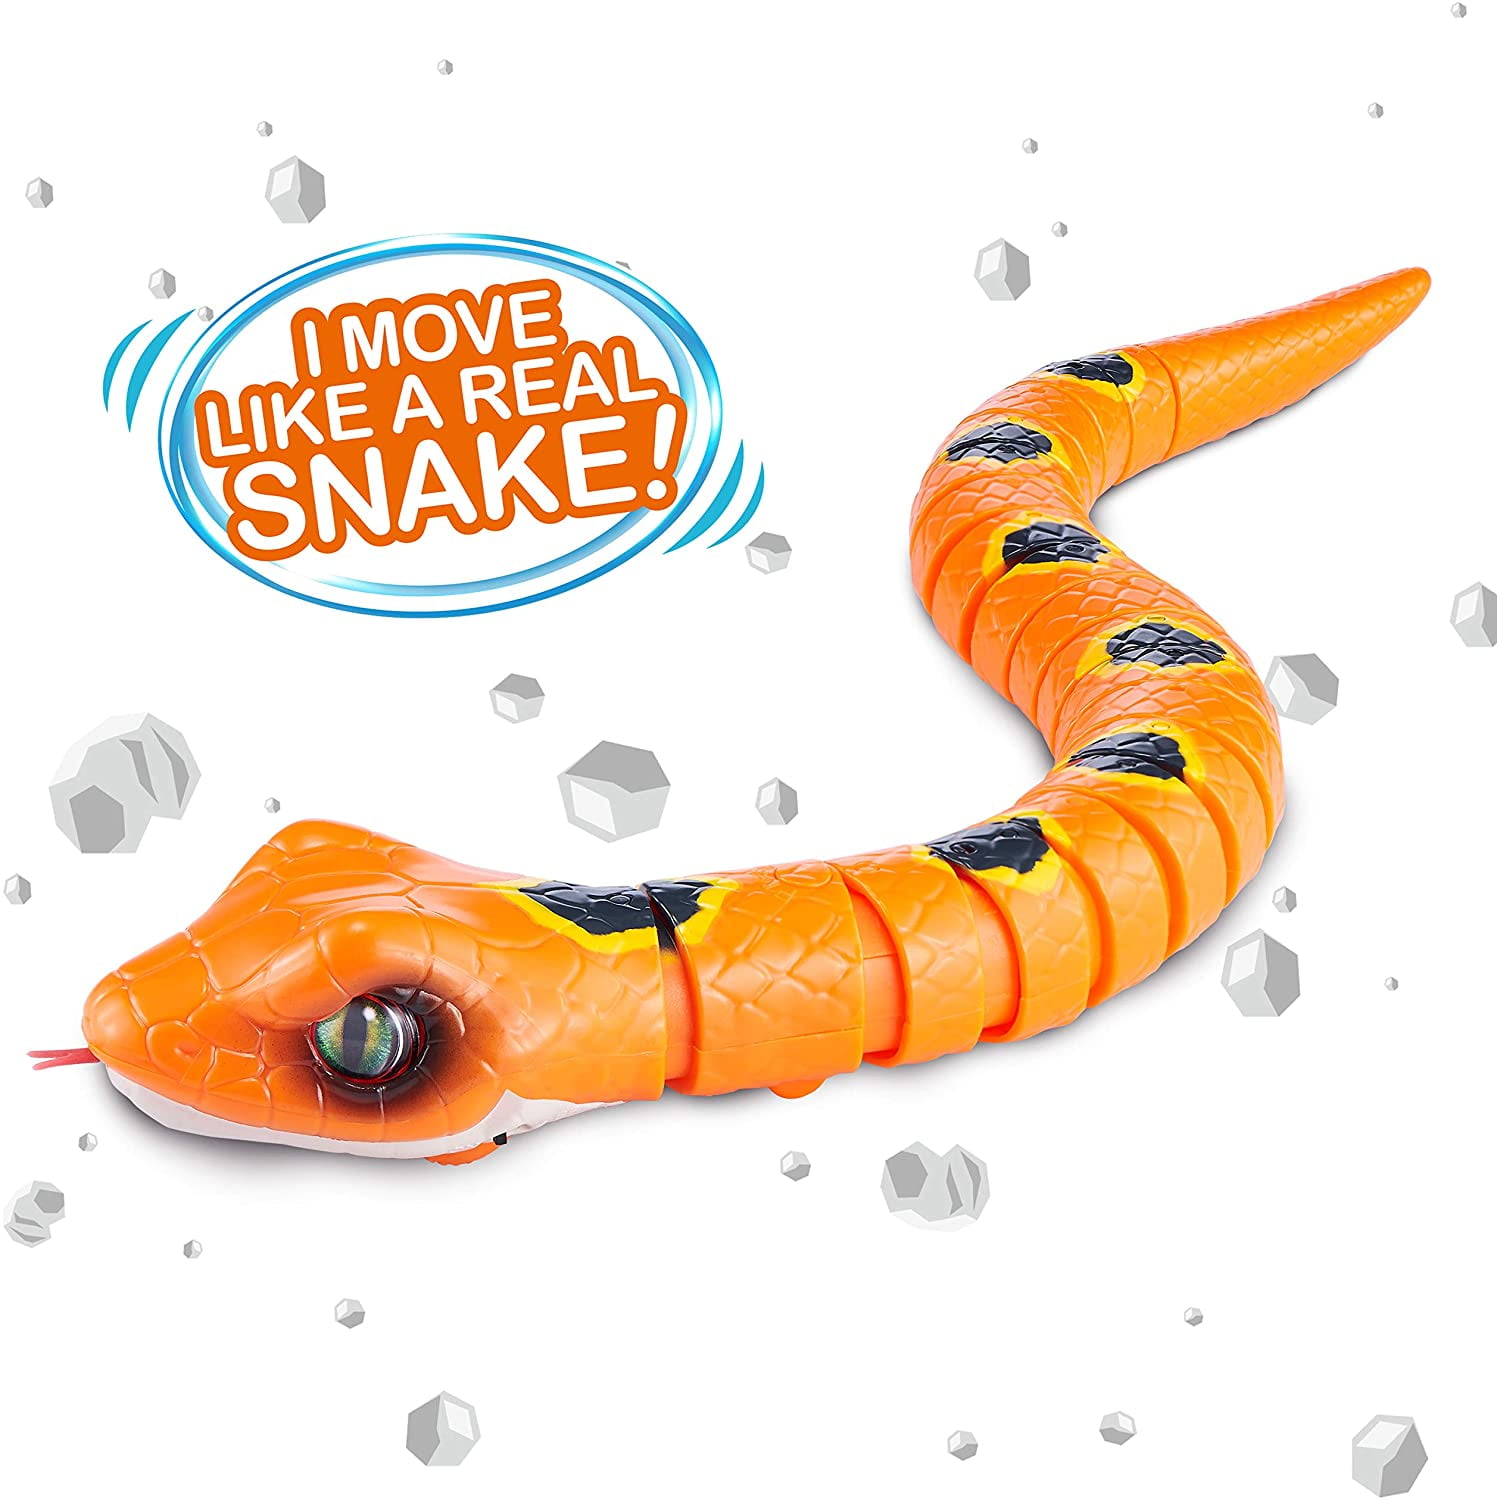 Terrifying Robot Snake Will Rescue You Whether You Like It Or Not